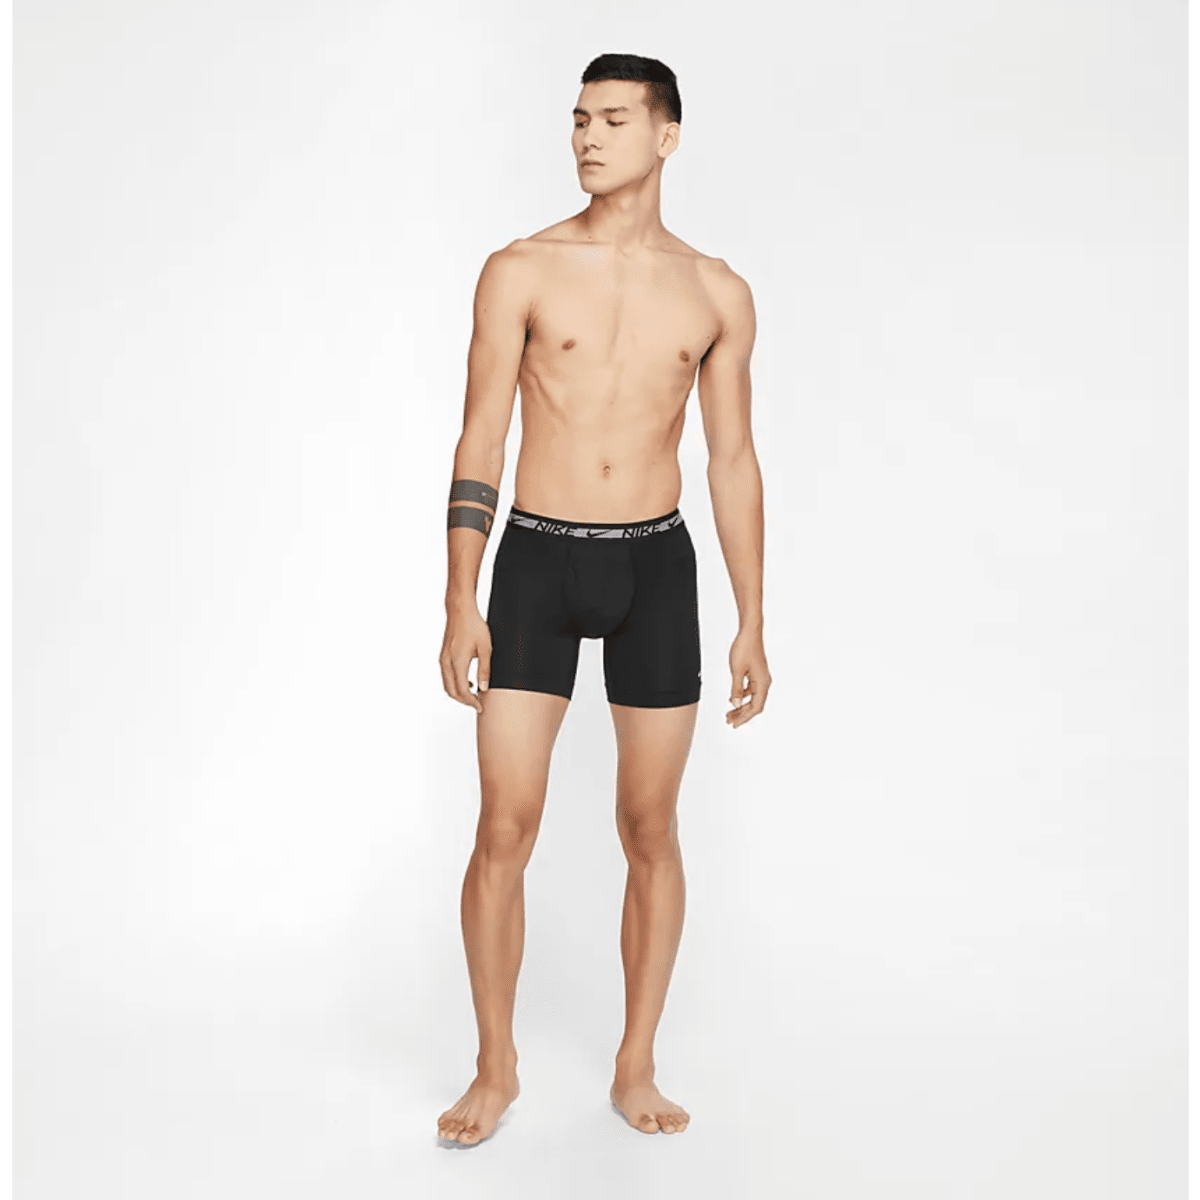 Reach A New Level Of Comfort With These Nike Boxer Briefs - Men's Journal